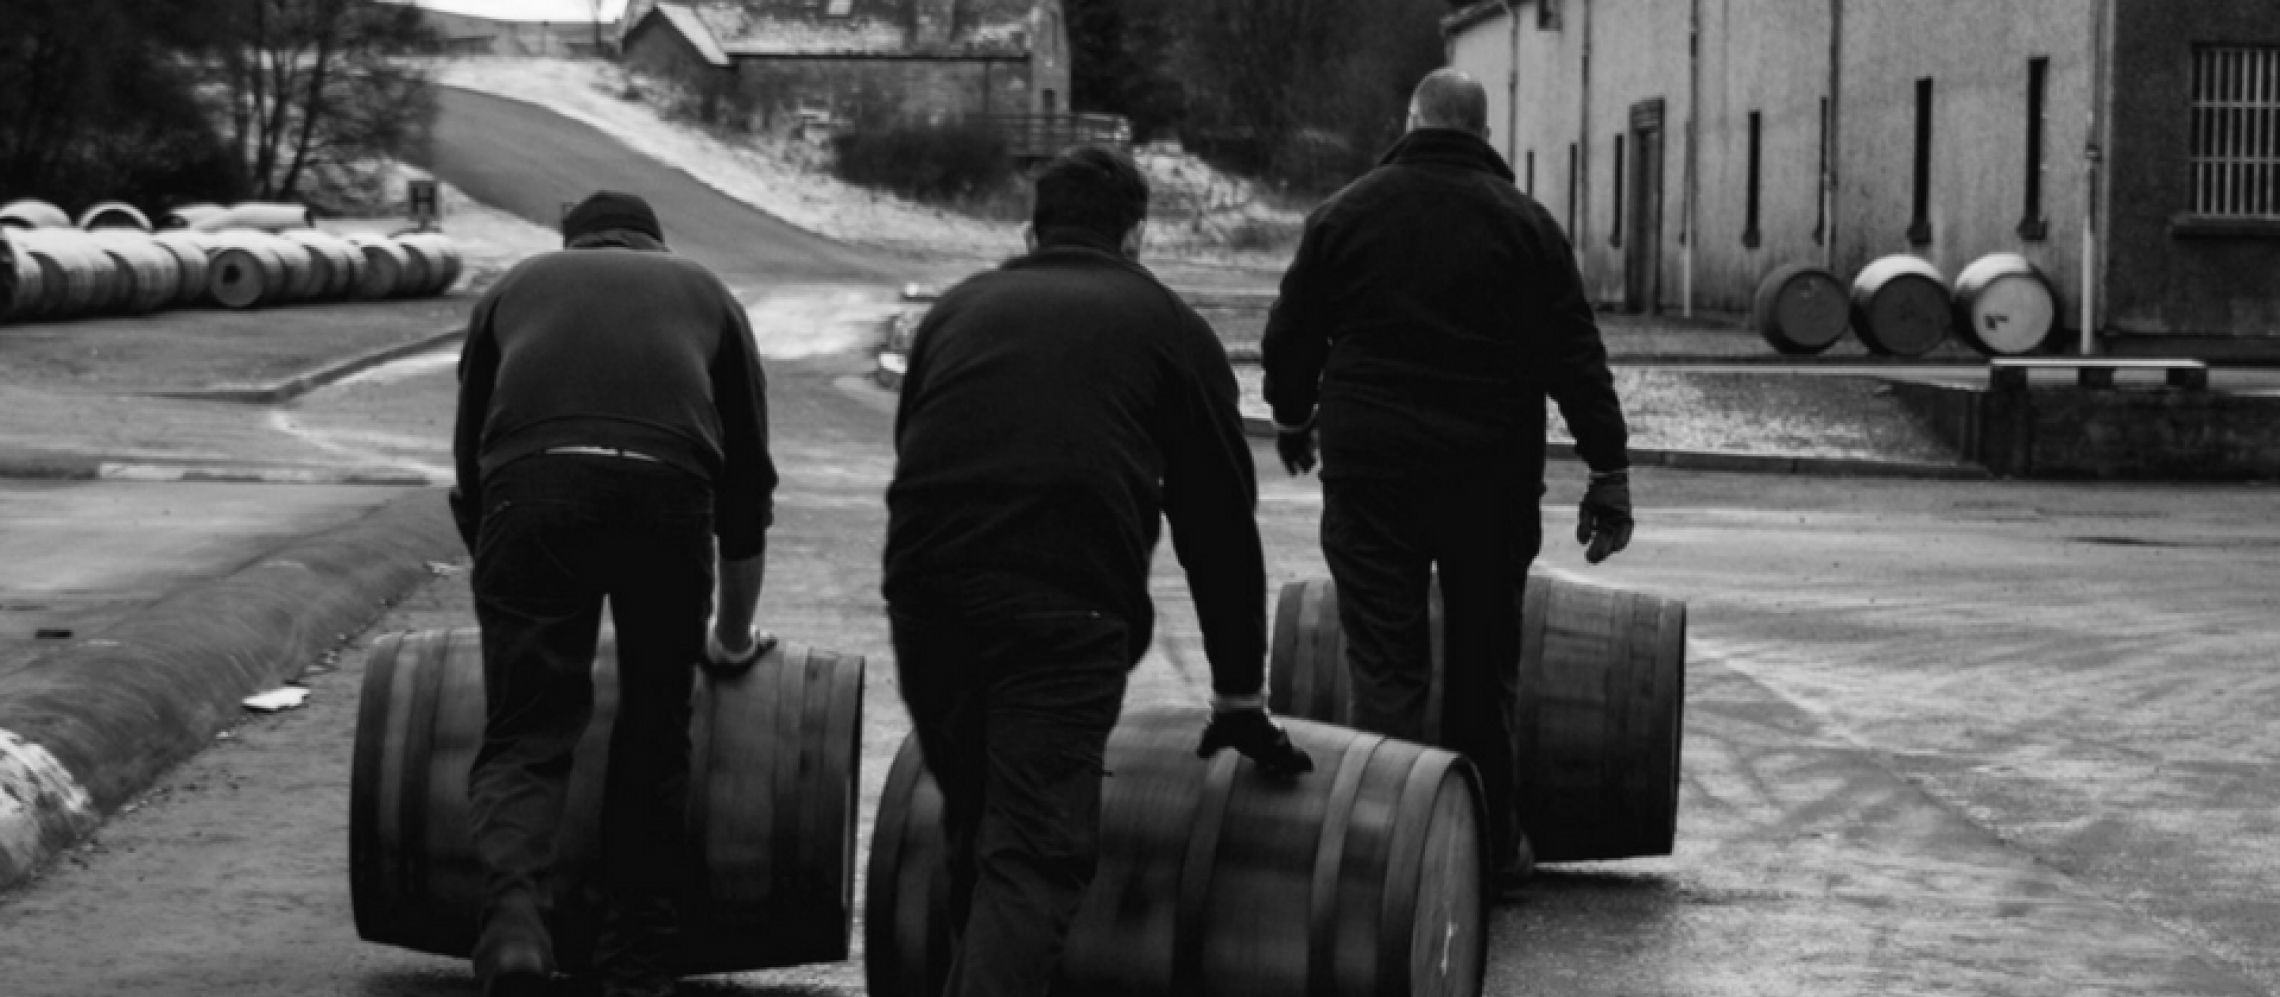 Photo for: Angus Dundee Distillers- Global Scotch Whiskey Producers in Scotland